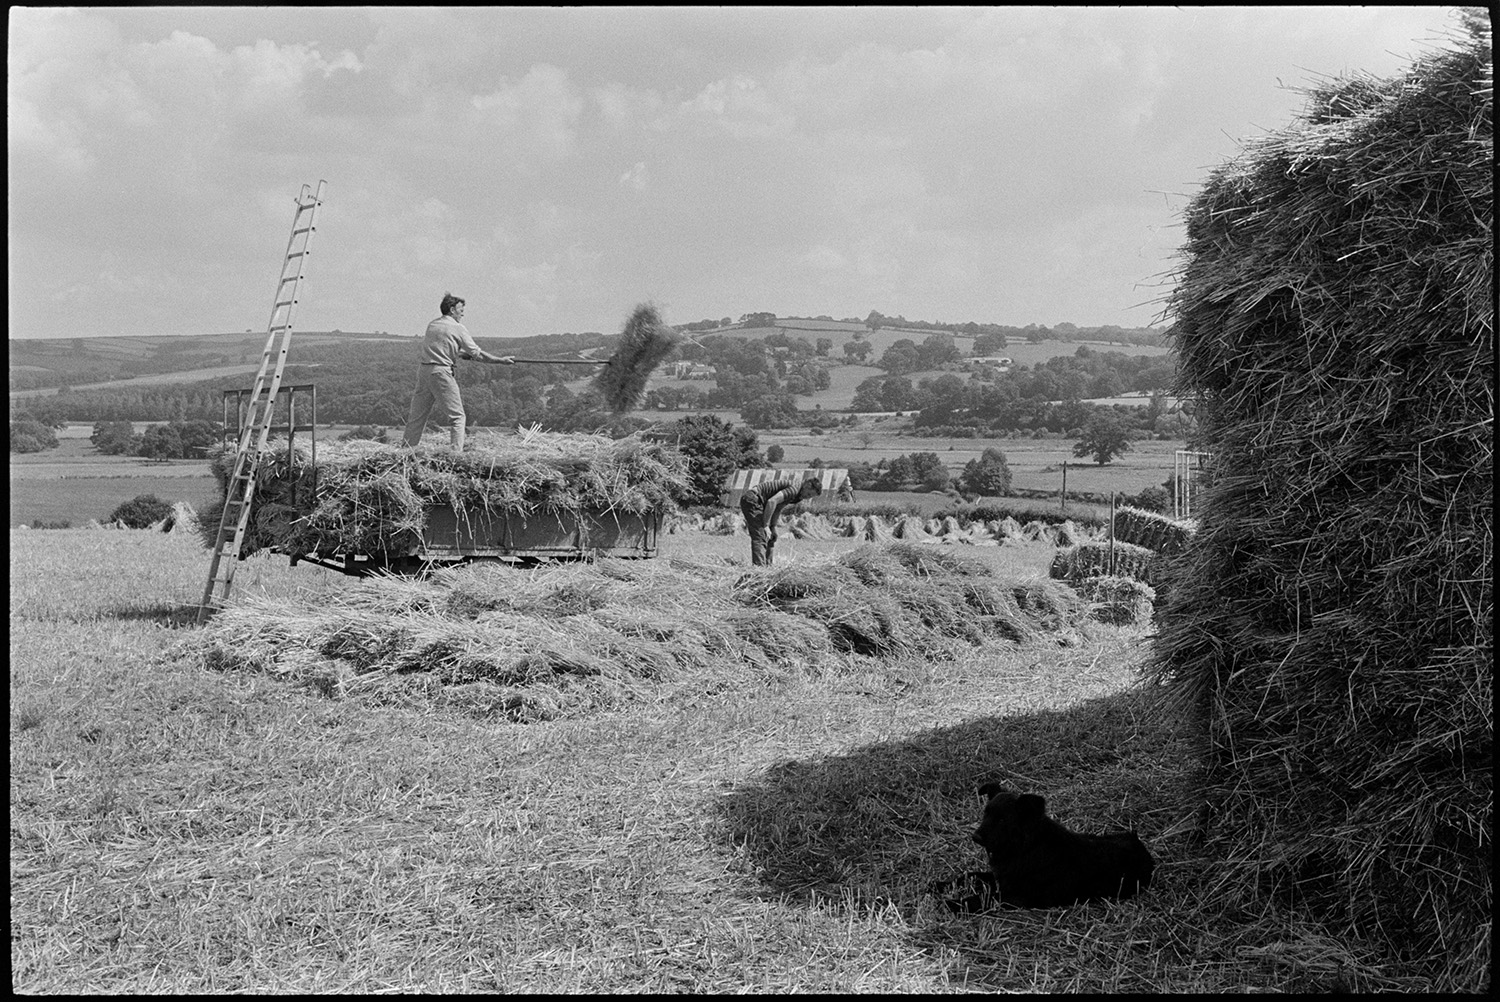 Men building wheatrick in harvest field.
[Men, possibly from the Cole family, unloading corn or wheat from a trailer and building a wheatrick in a field at Ashreigney. A ladder is resting against the trailer. A dog is lying in the shade of a wheatrick in the foreground and  views of hills, fields and trees are visible in the distance.]